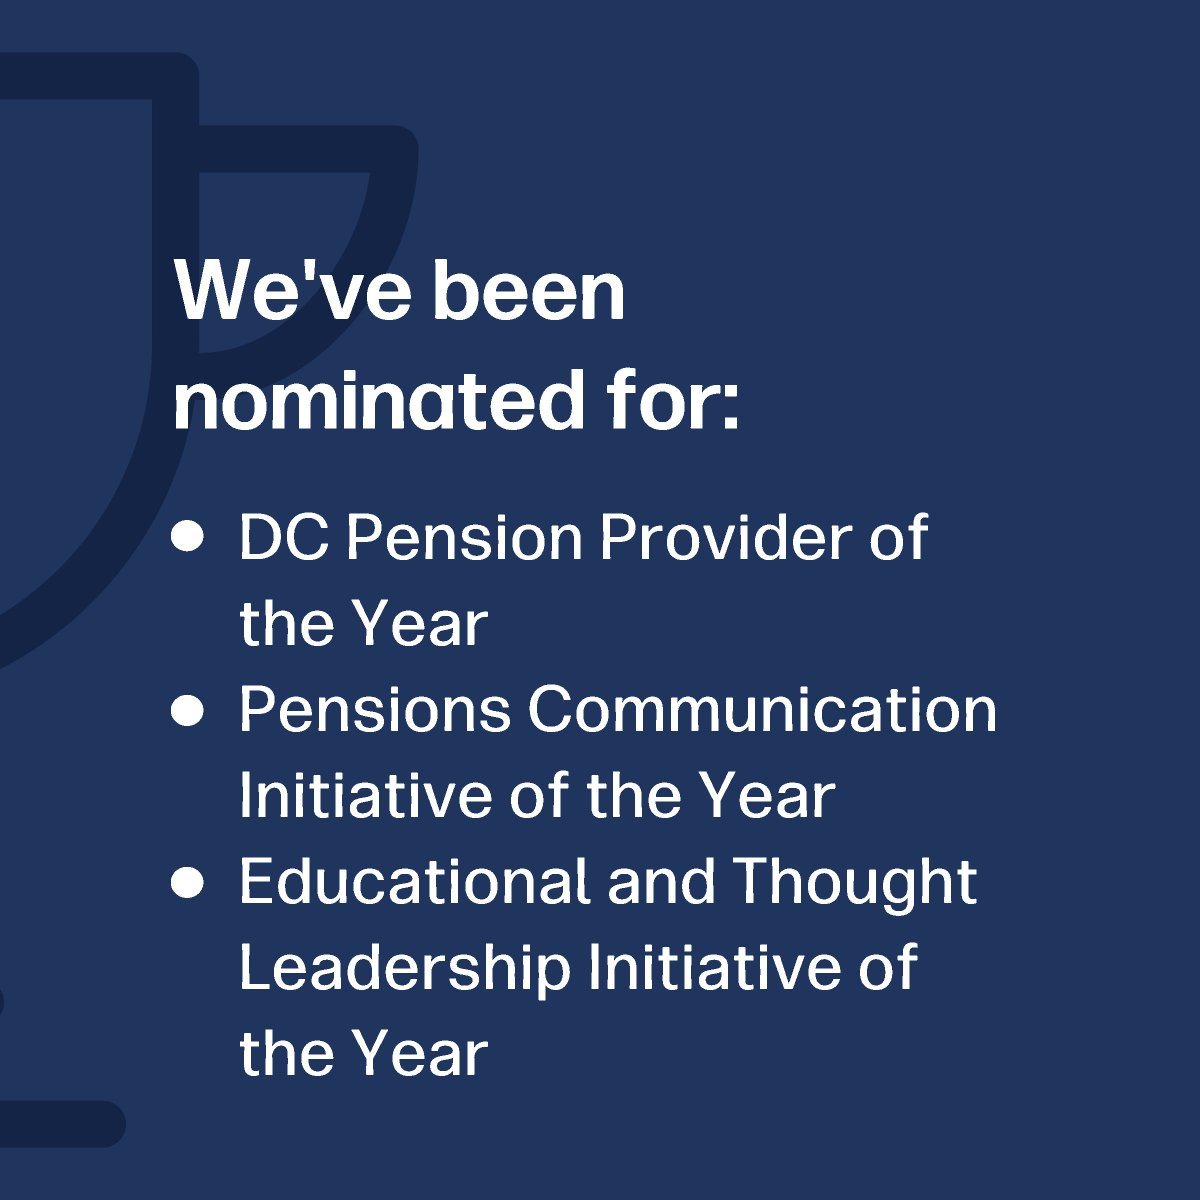 Awards season is in full swing. We’ve been shortlisted at the #UKPensionAwards – check out what we’ve been nominated for 👏👇